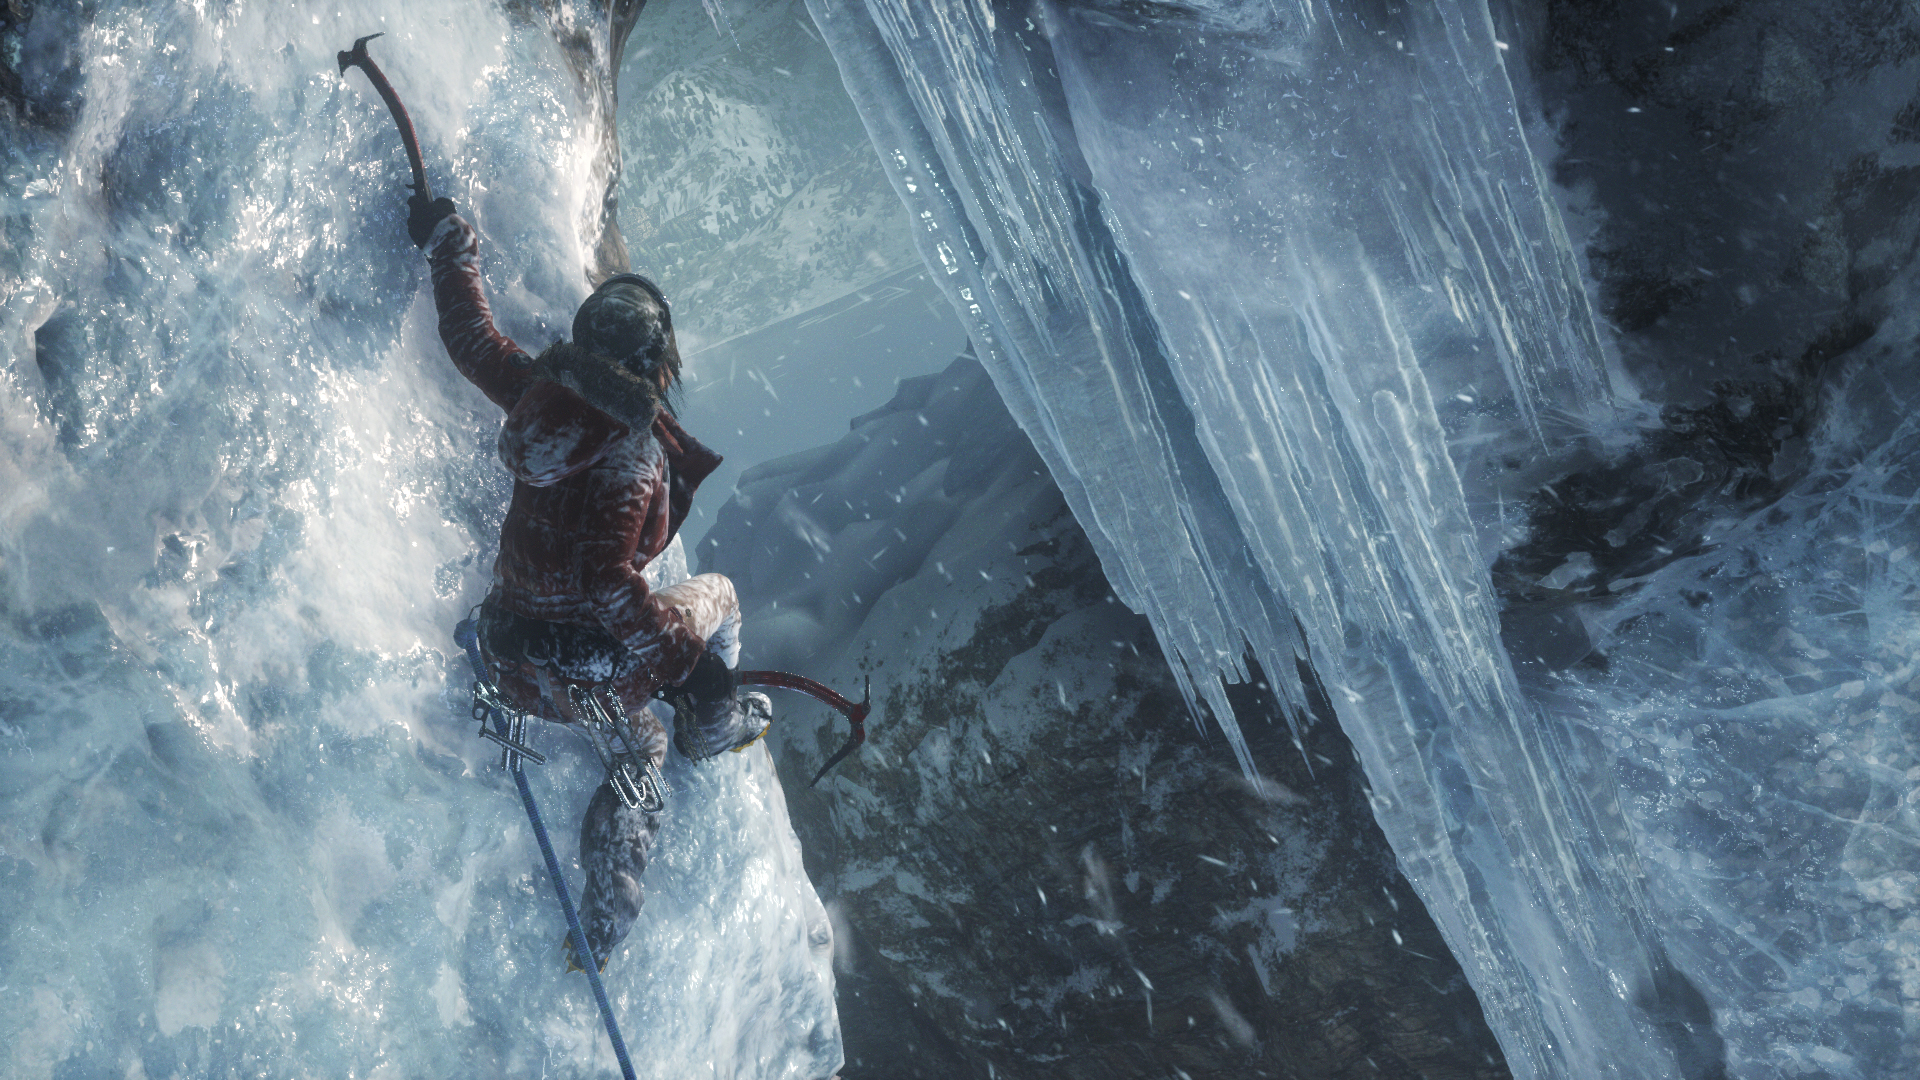 Media asset in full size related to 3dfxzone.it news item entitled as follows: Rise of the Tomb Raider non includer la versione multiplayer | Image Name: news23033_Rise-of-the-Tomb-Raider-Screenshot_6.jpg